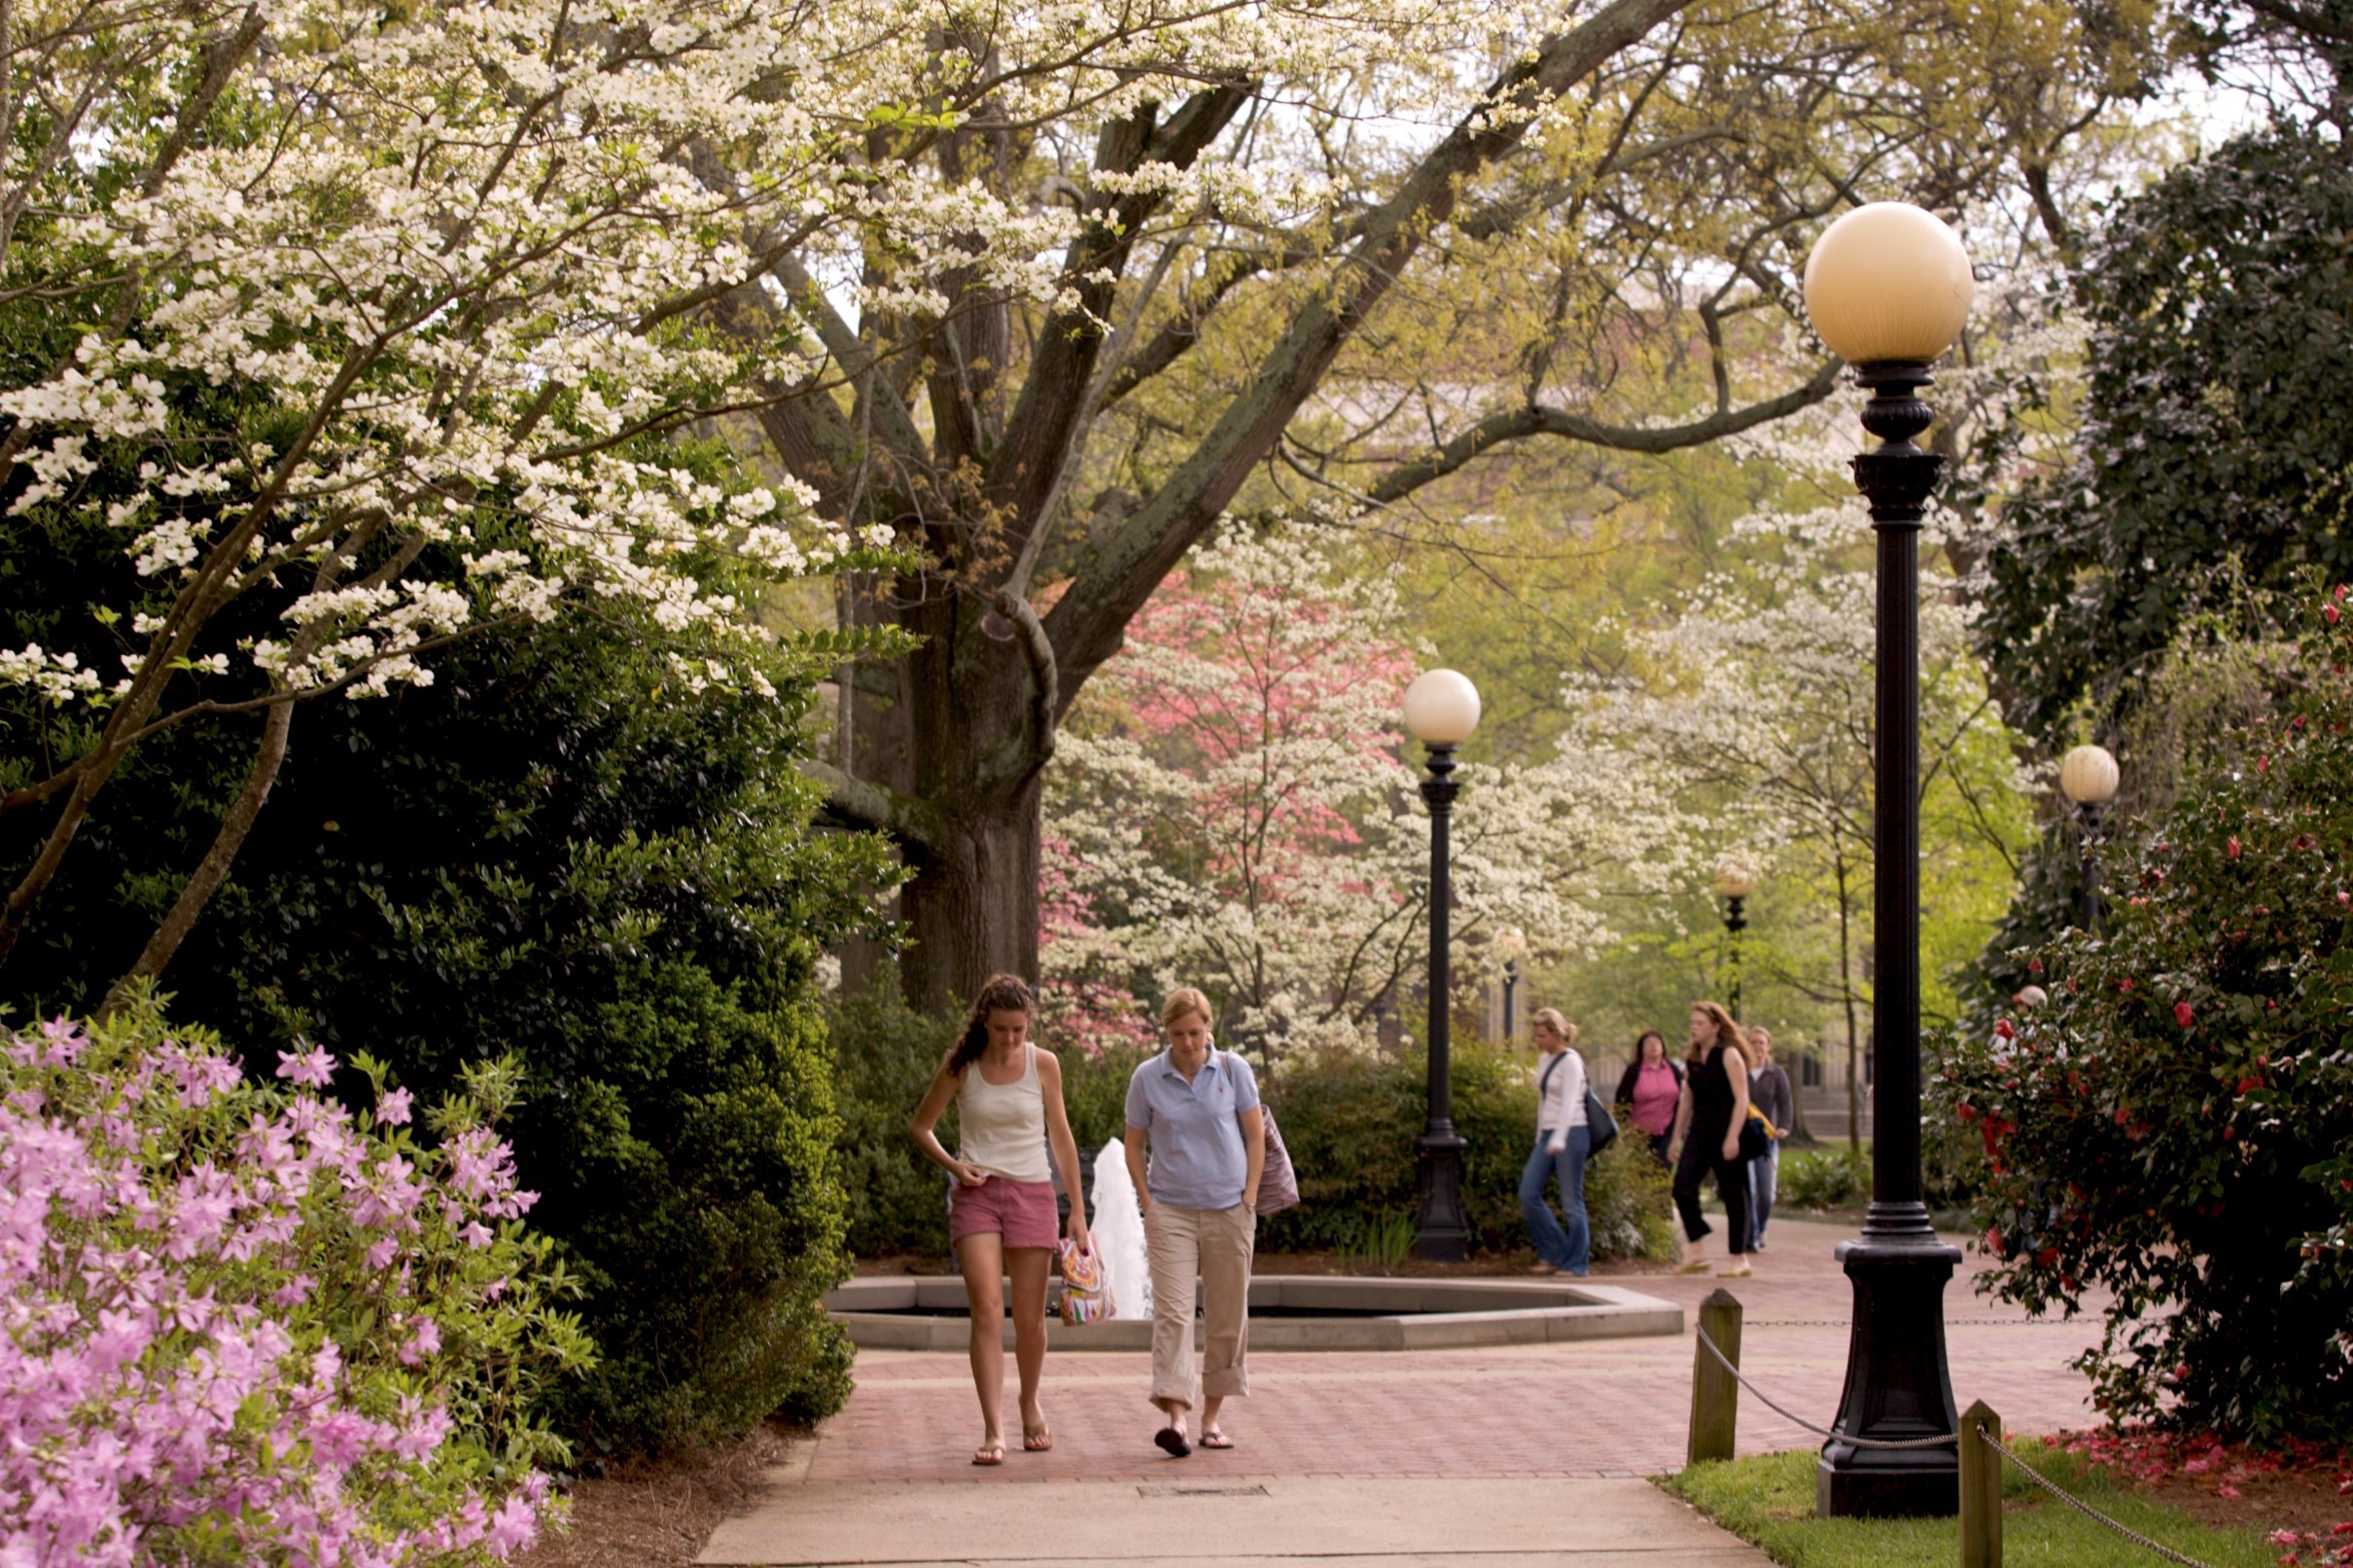 uga campus with people walking together